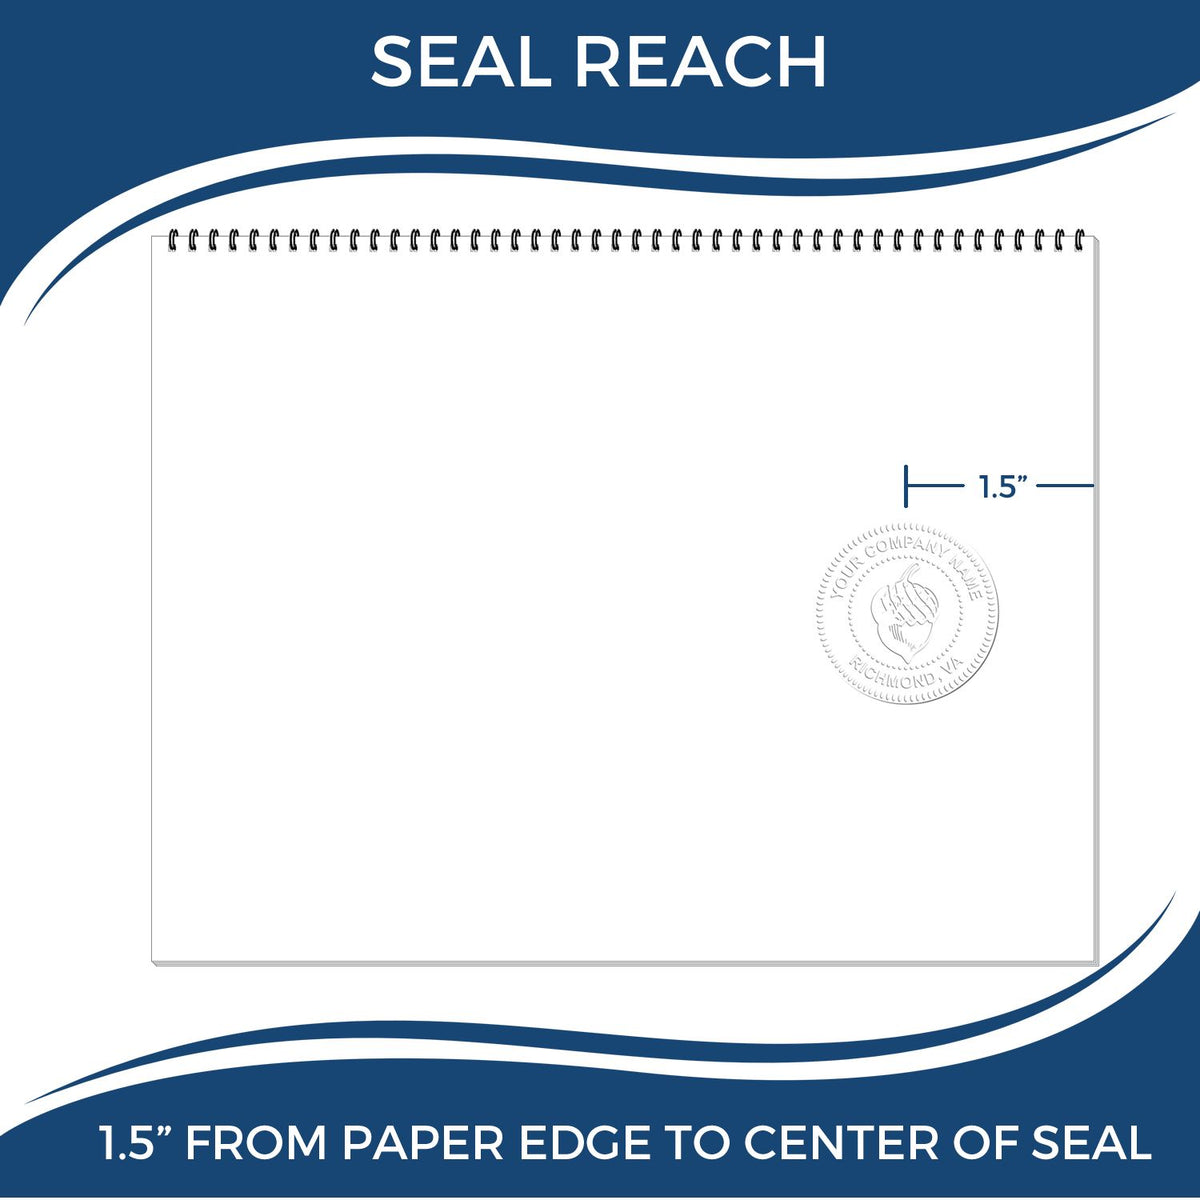 An infographic showing the seal reach which is represented by a ruler and a miniature seal image of the Hybrid Tennessee Architect Seal